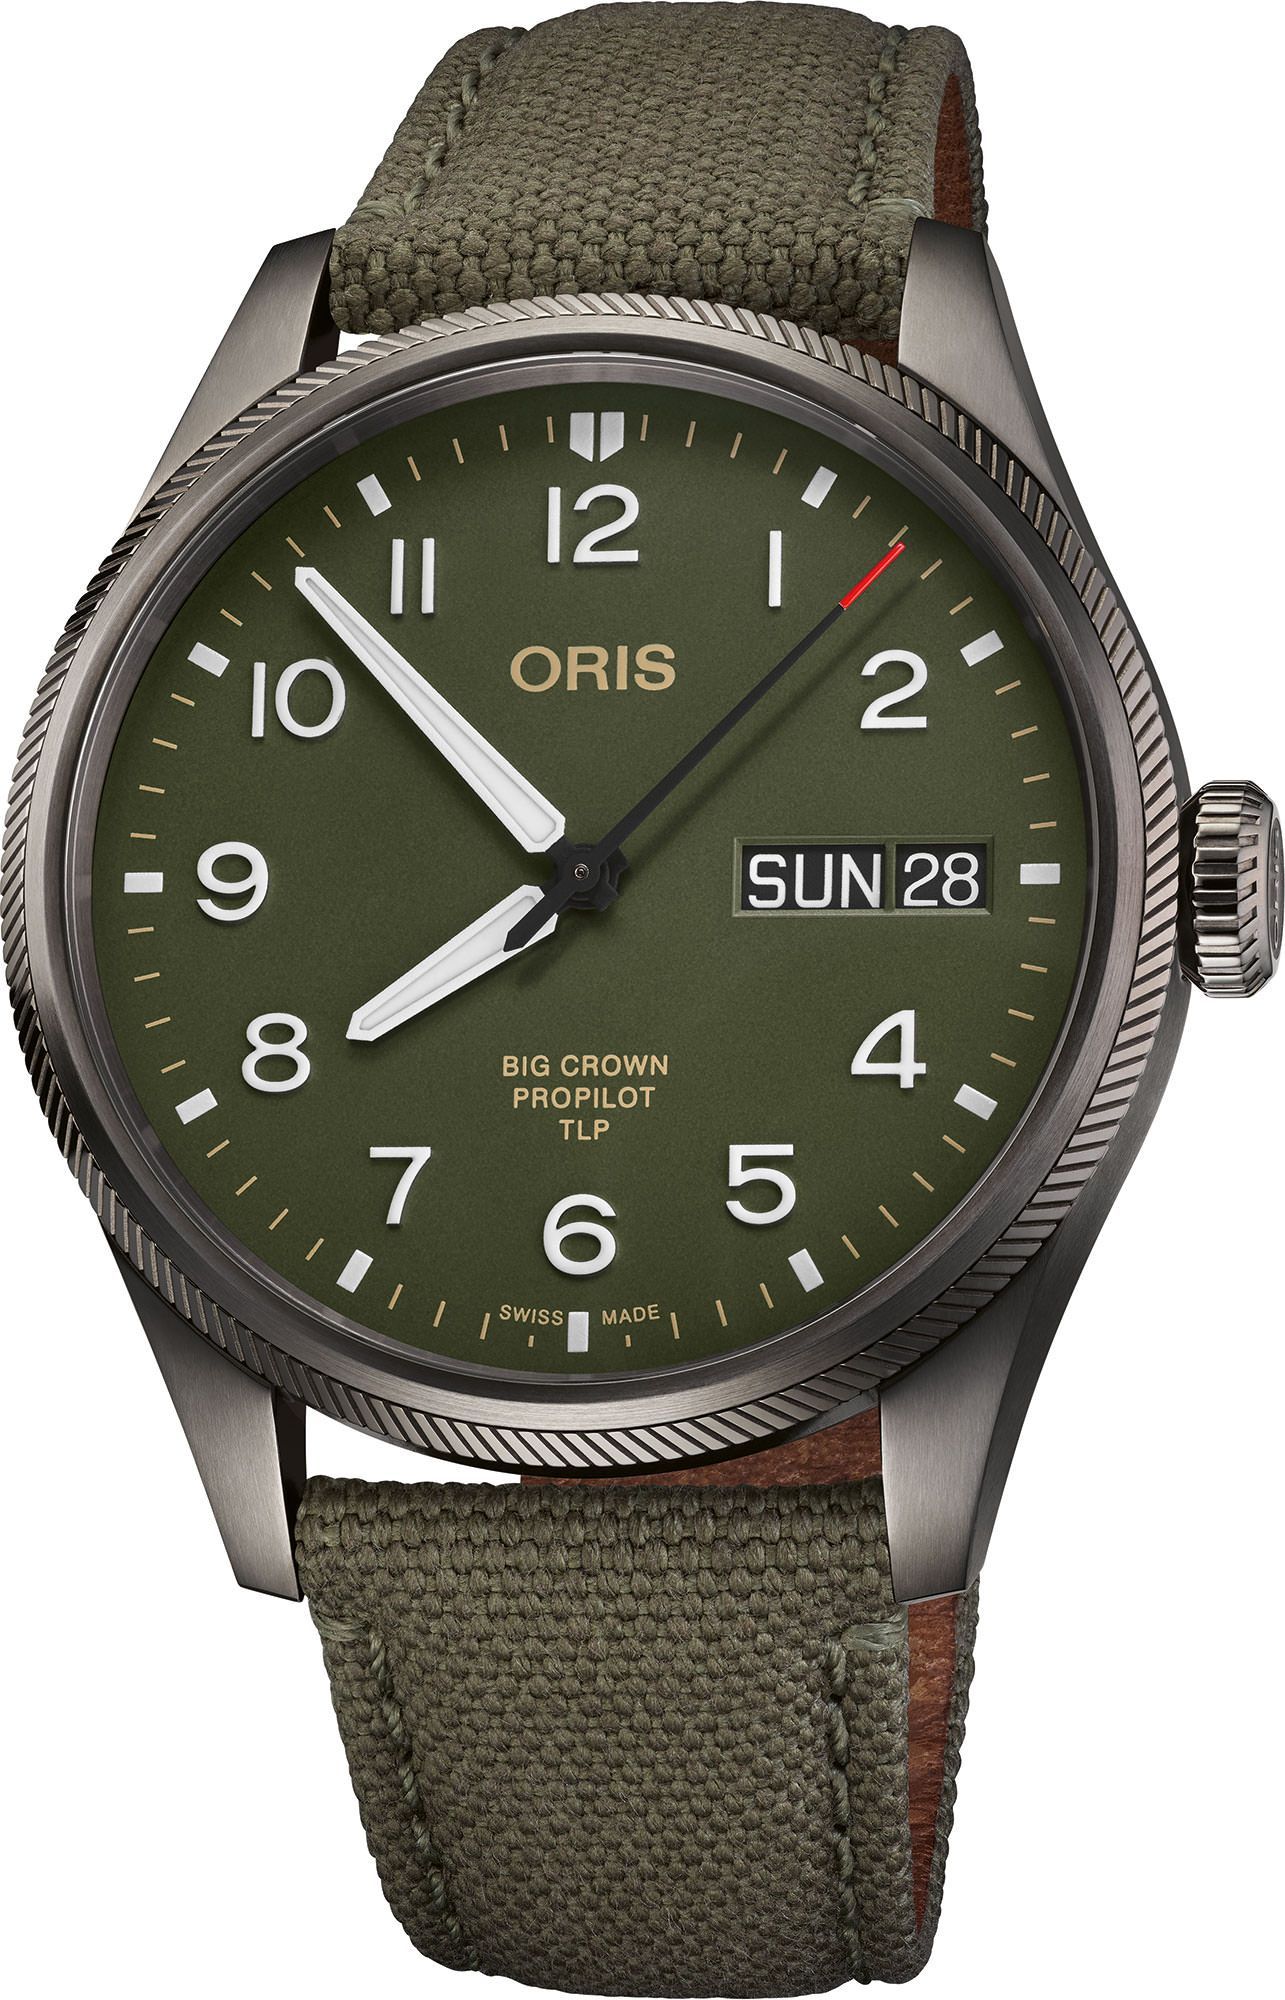 Oris ProPilot TLP Limited Edition Green Dial 44 mm Automatic Watch For Men - 1